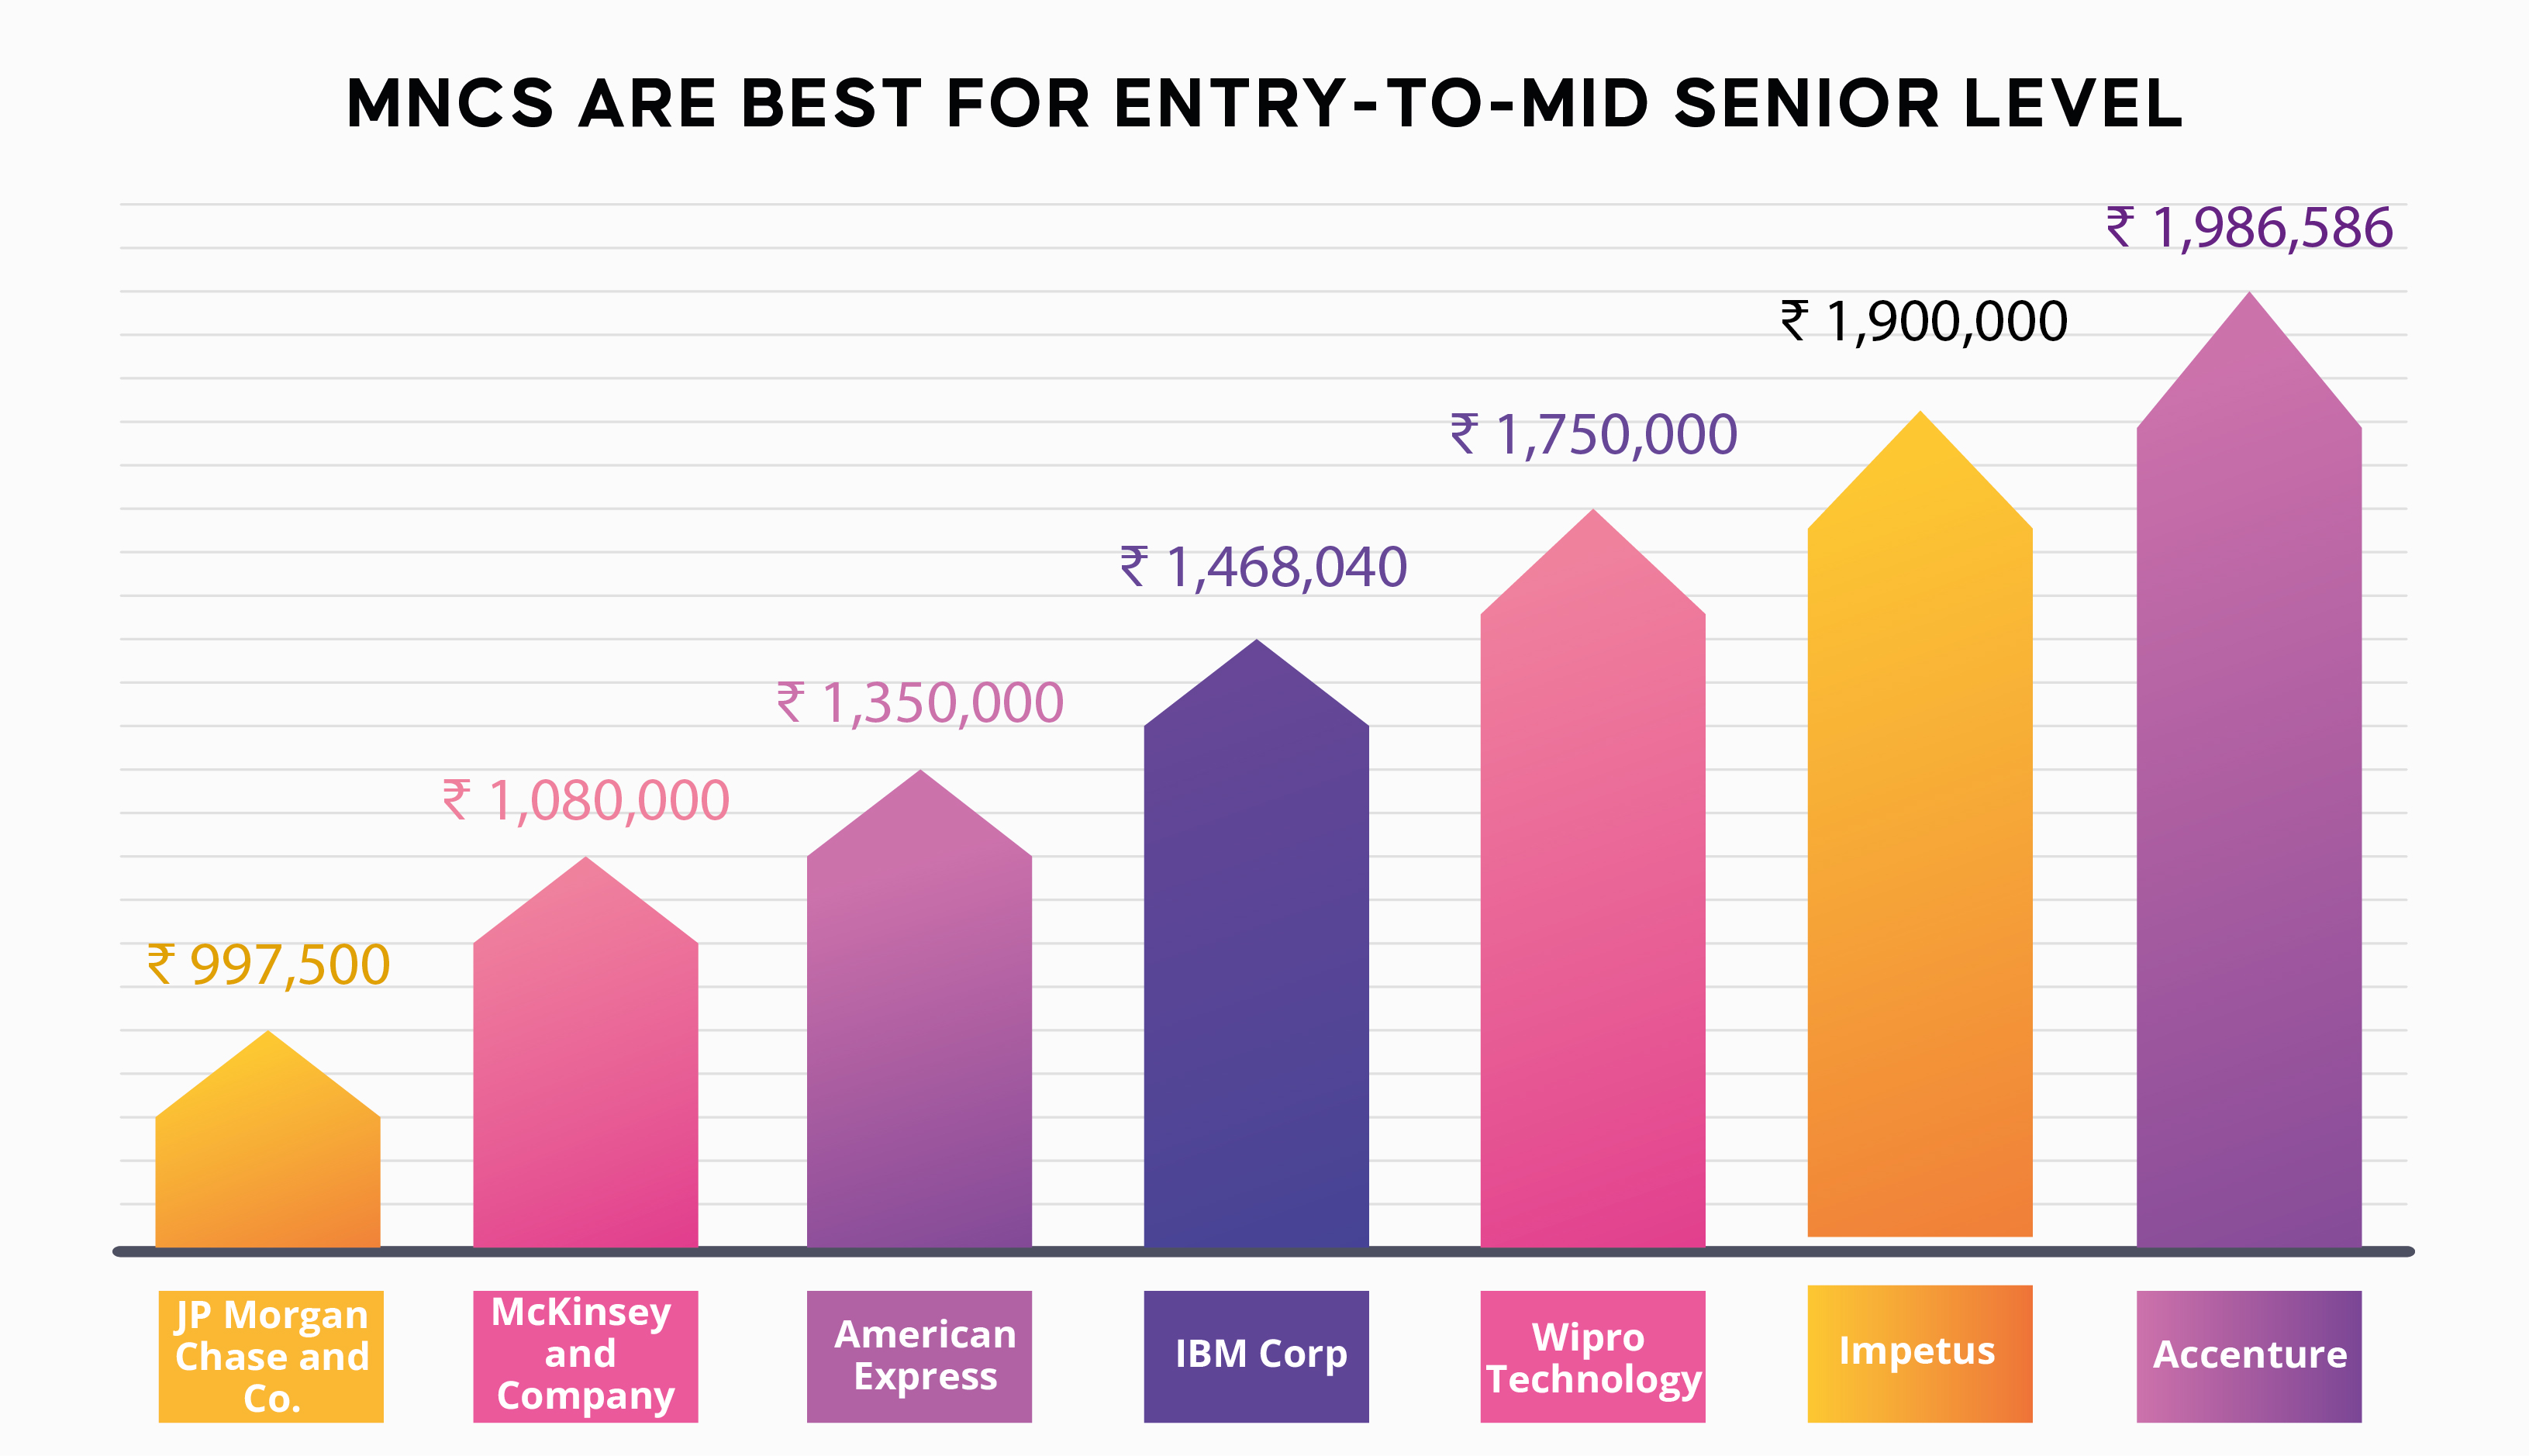 A bar graph titled, 'MNCS ARE BEST FOR ENTRY-TO-MID SENIOR LEVEL' List of Salary ranges for entry-to-mid-level data scientists at the best multinational companies. The Data are as follows in(decreasing order) :
Accenture: 1,986,586 Indian Rupees
Impetus: 1,900,000 Indian Rupees
Wipro Technology: 1,750,000 Indian Rupees
IBM Crop: 1,468,040 Indian Rupees
American Express: 1,350,000 Indian Rupees
McKinsey and Company: 1,080,000 Indian Rupees
JP Morgan Chase and Co: 997,500 Indian Rupees